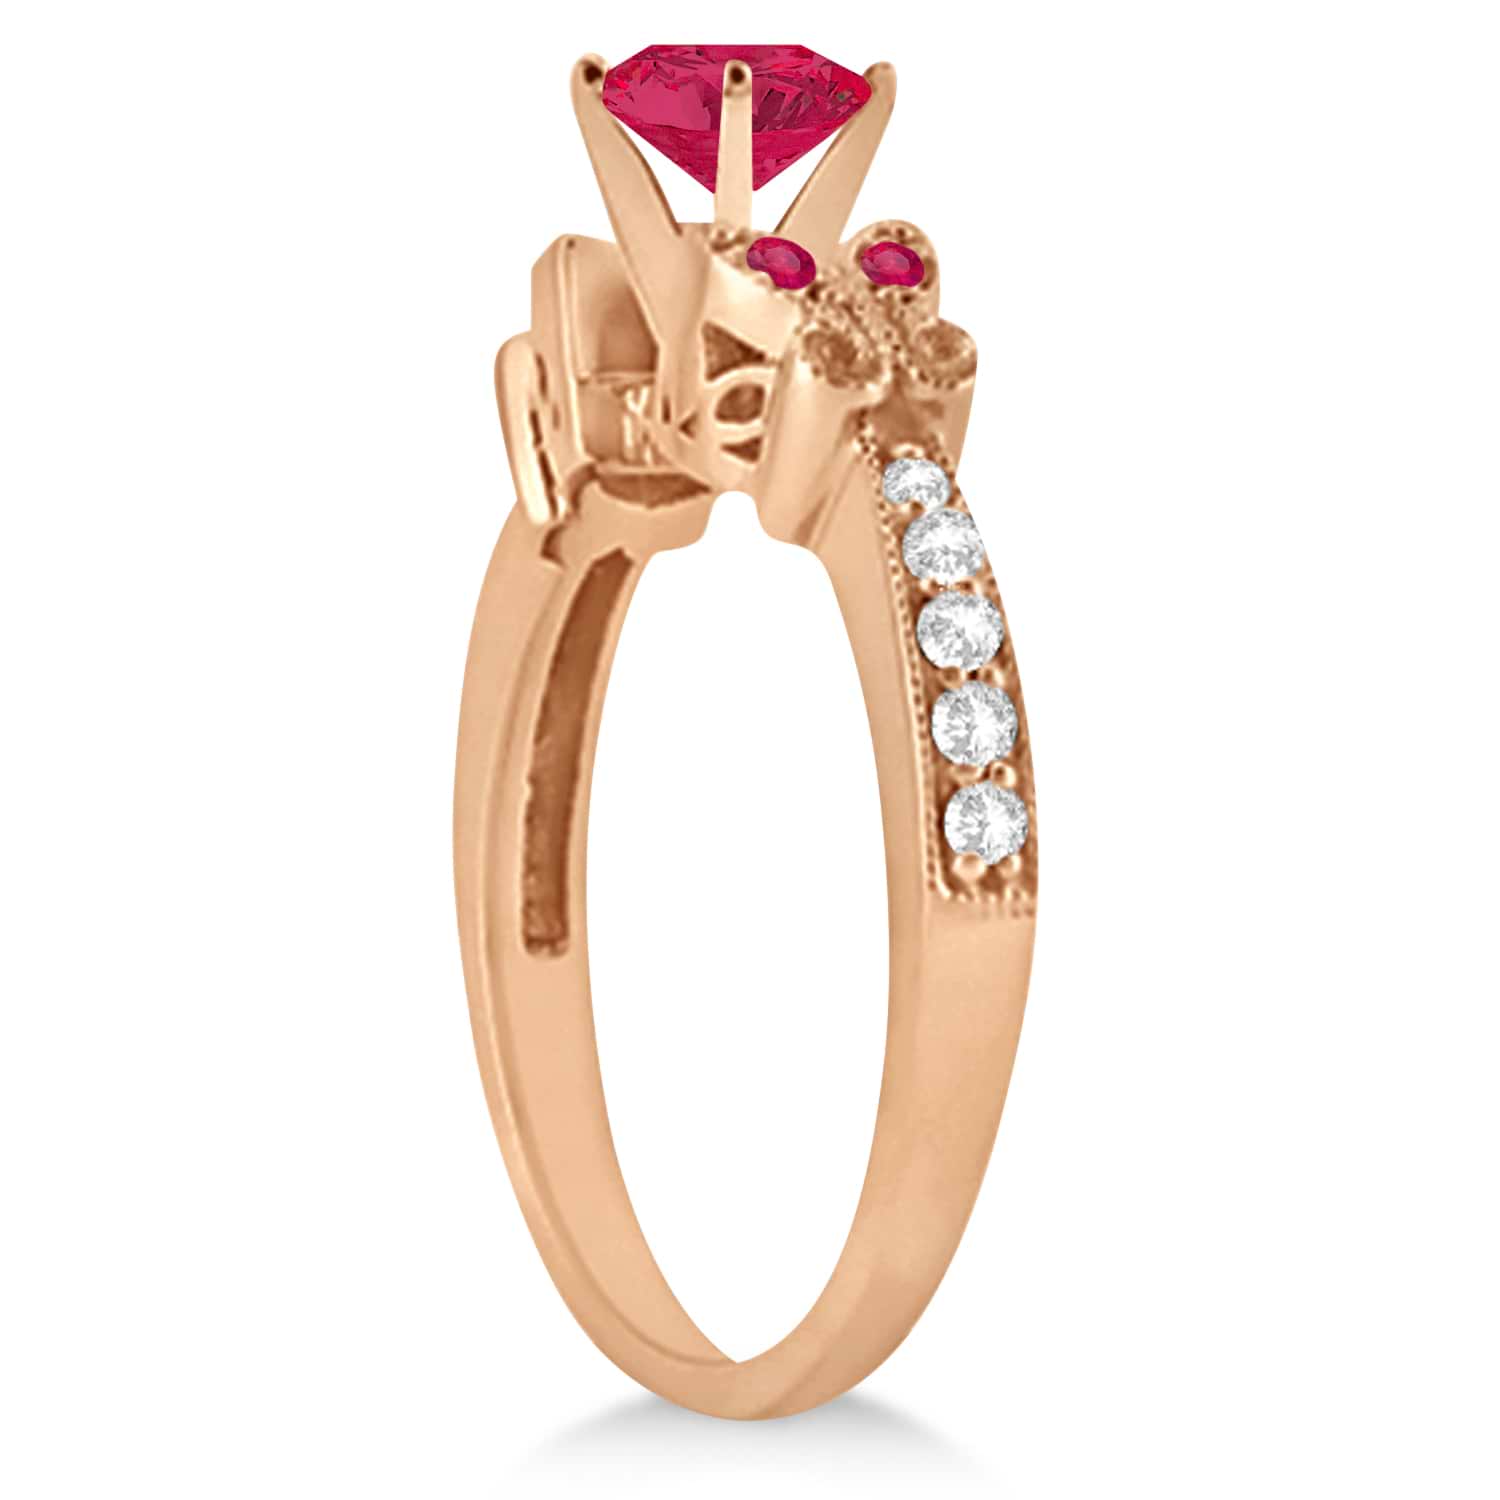 Butterfly Genuine Ruby & Diamond Engagement Ring 14K Rose Gold 1.26ct